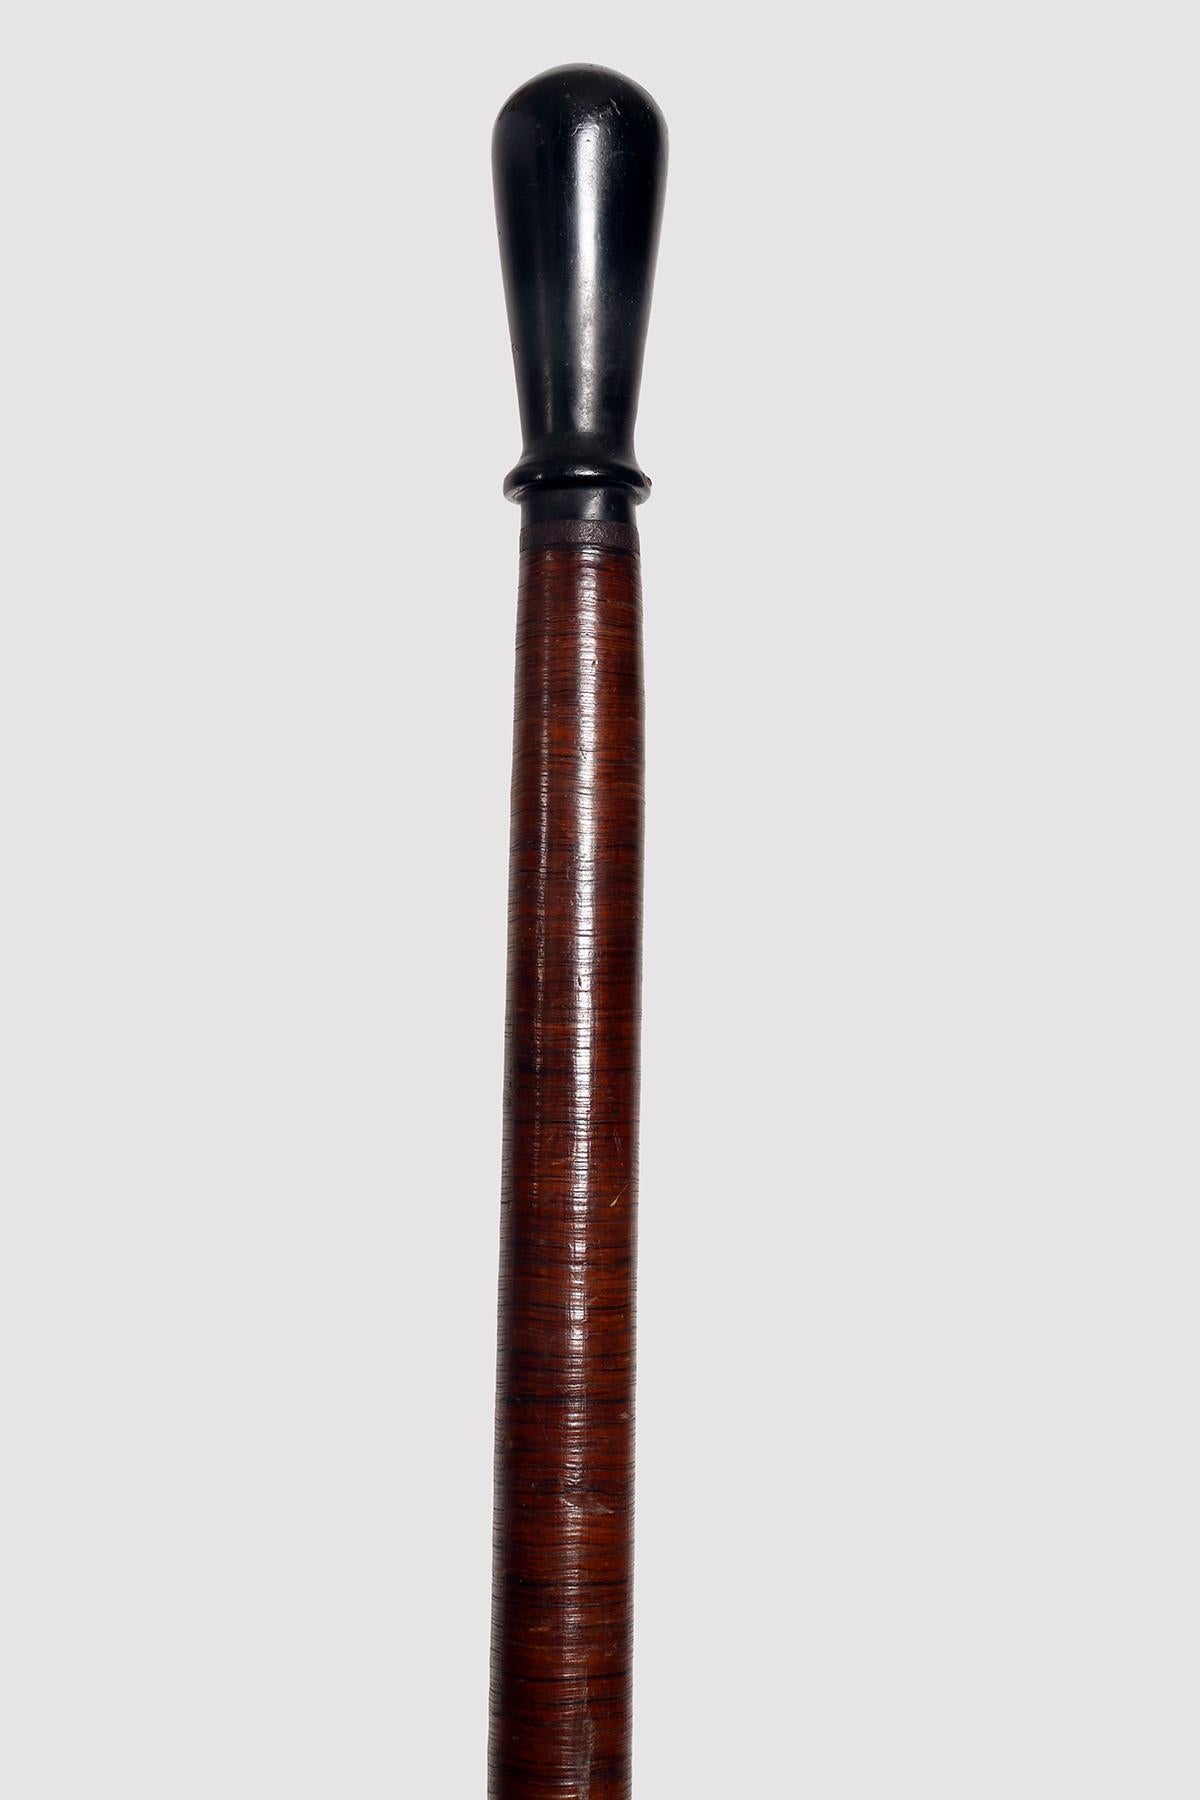 Folk art walking stick: stick with metal tip, the shaft made from an iron core in which leather discs are inserted, with a progressive diameter up to the handle. The cane is polished and waxed. The handle is connected by an iron ring, and is made of